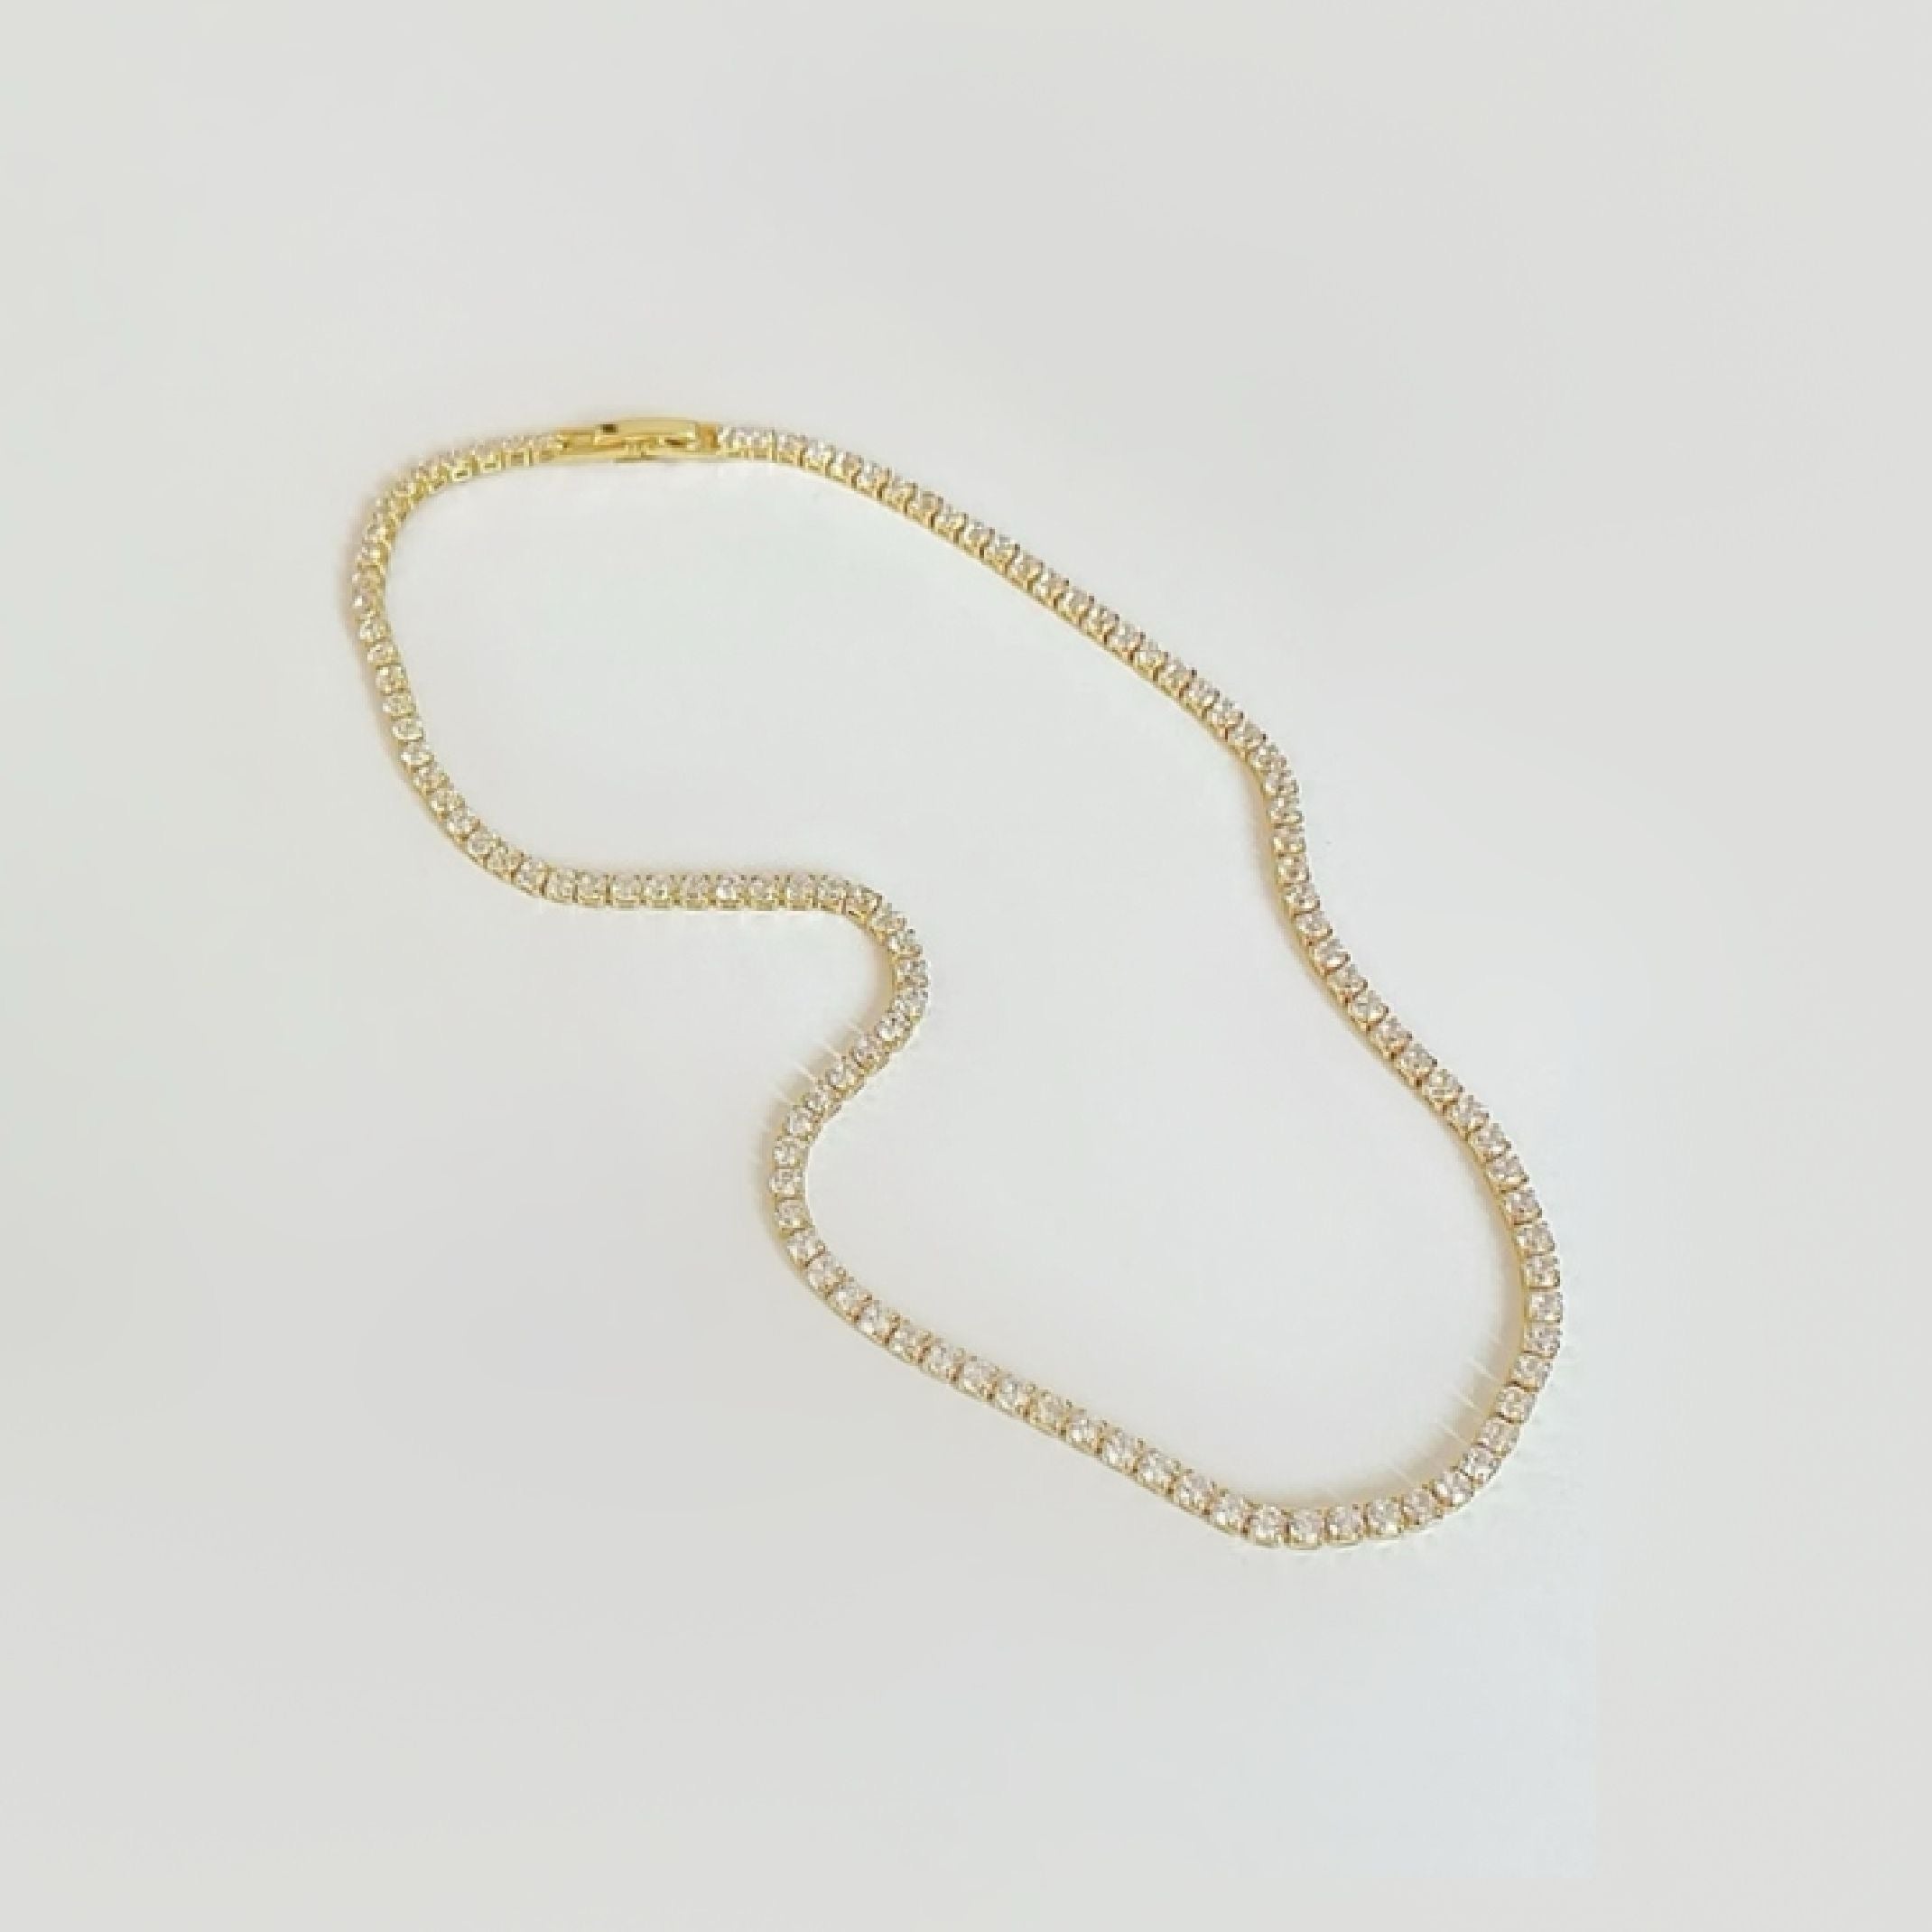 Dainty tennis necklace 